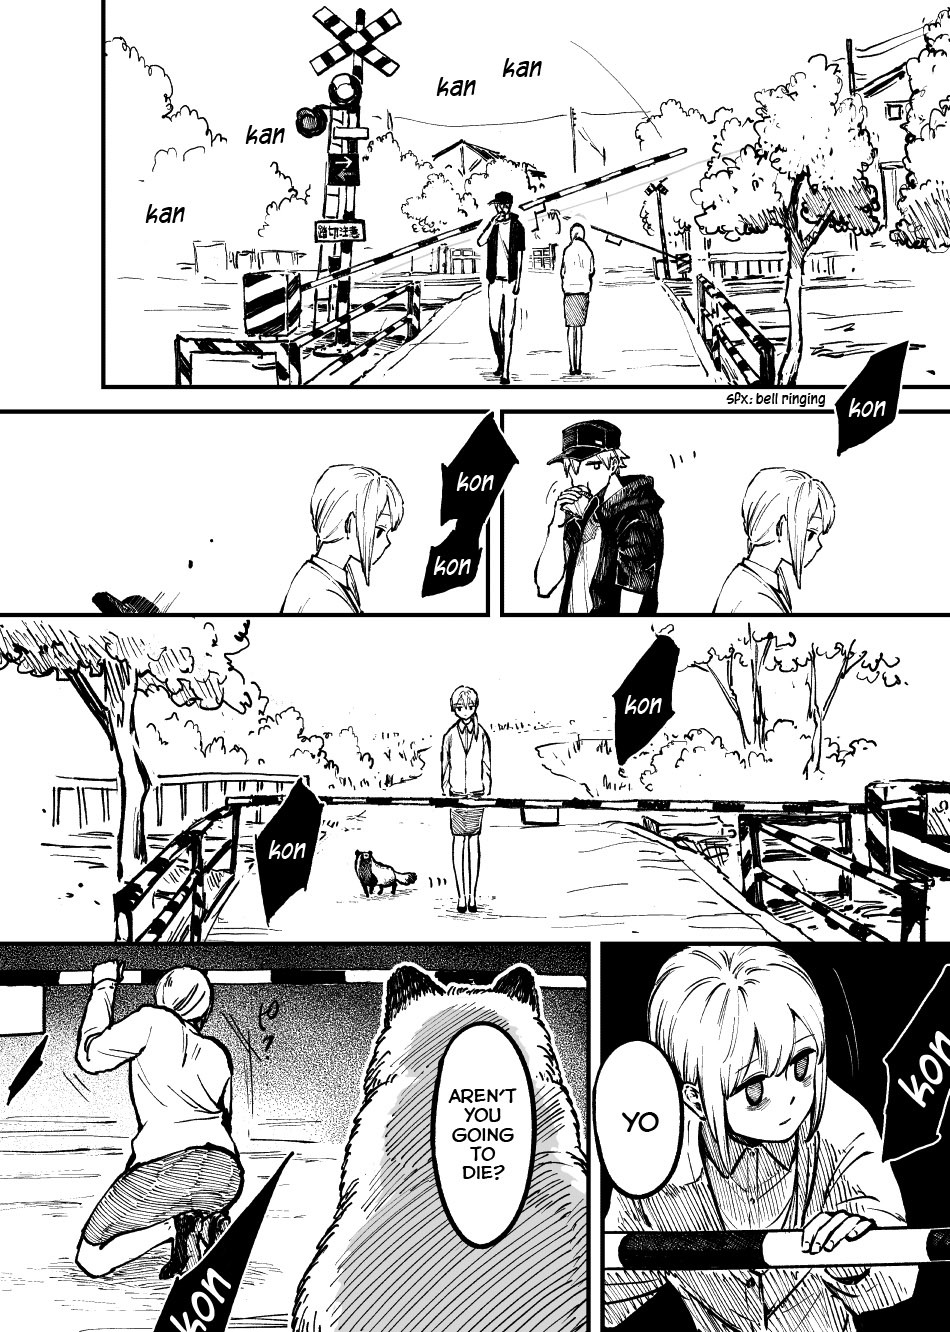 OL who was scouted by a raccoon when she tried to die vol.1 ch.1